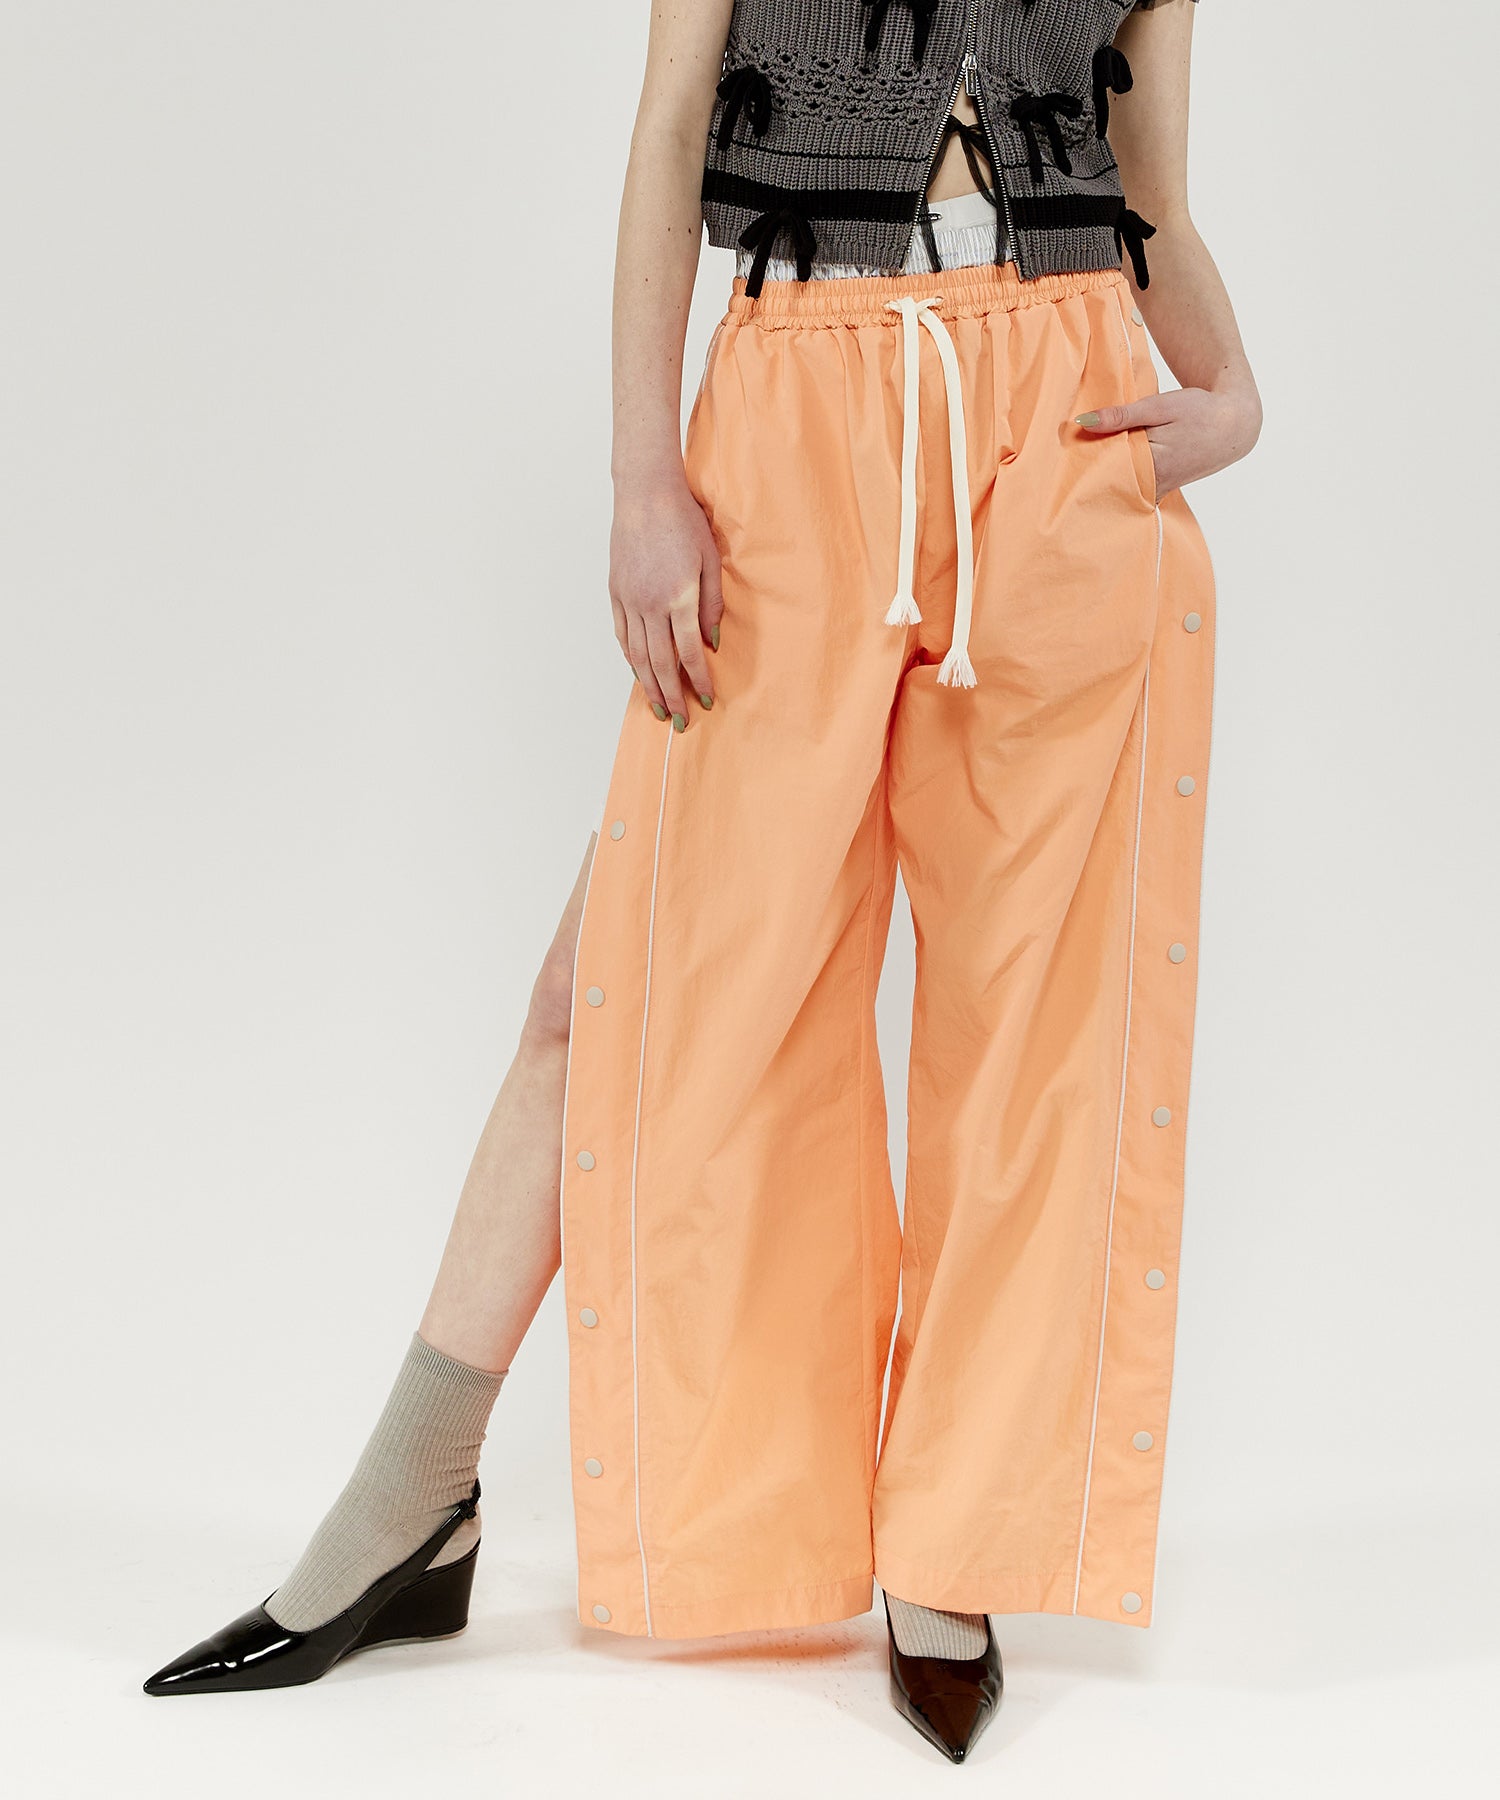 Double Waist Side Button PANTS パンツ・ズボン 新品 Maison SPECIAL ORG レディース 36 BLK 34% 100% Name WOMEN